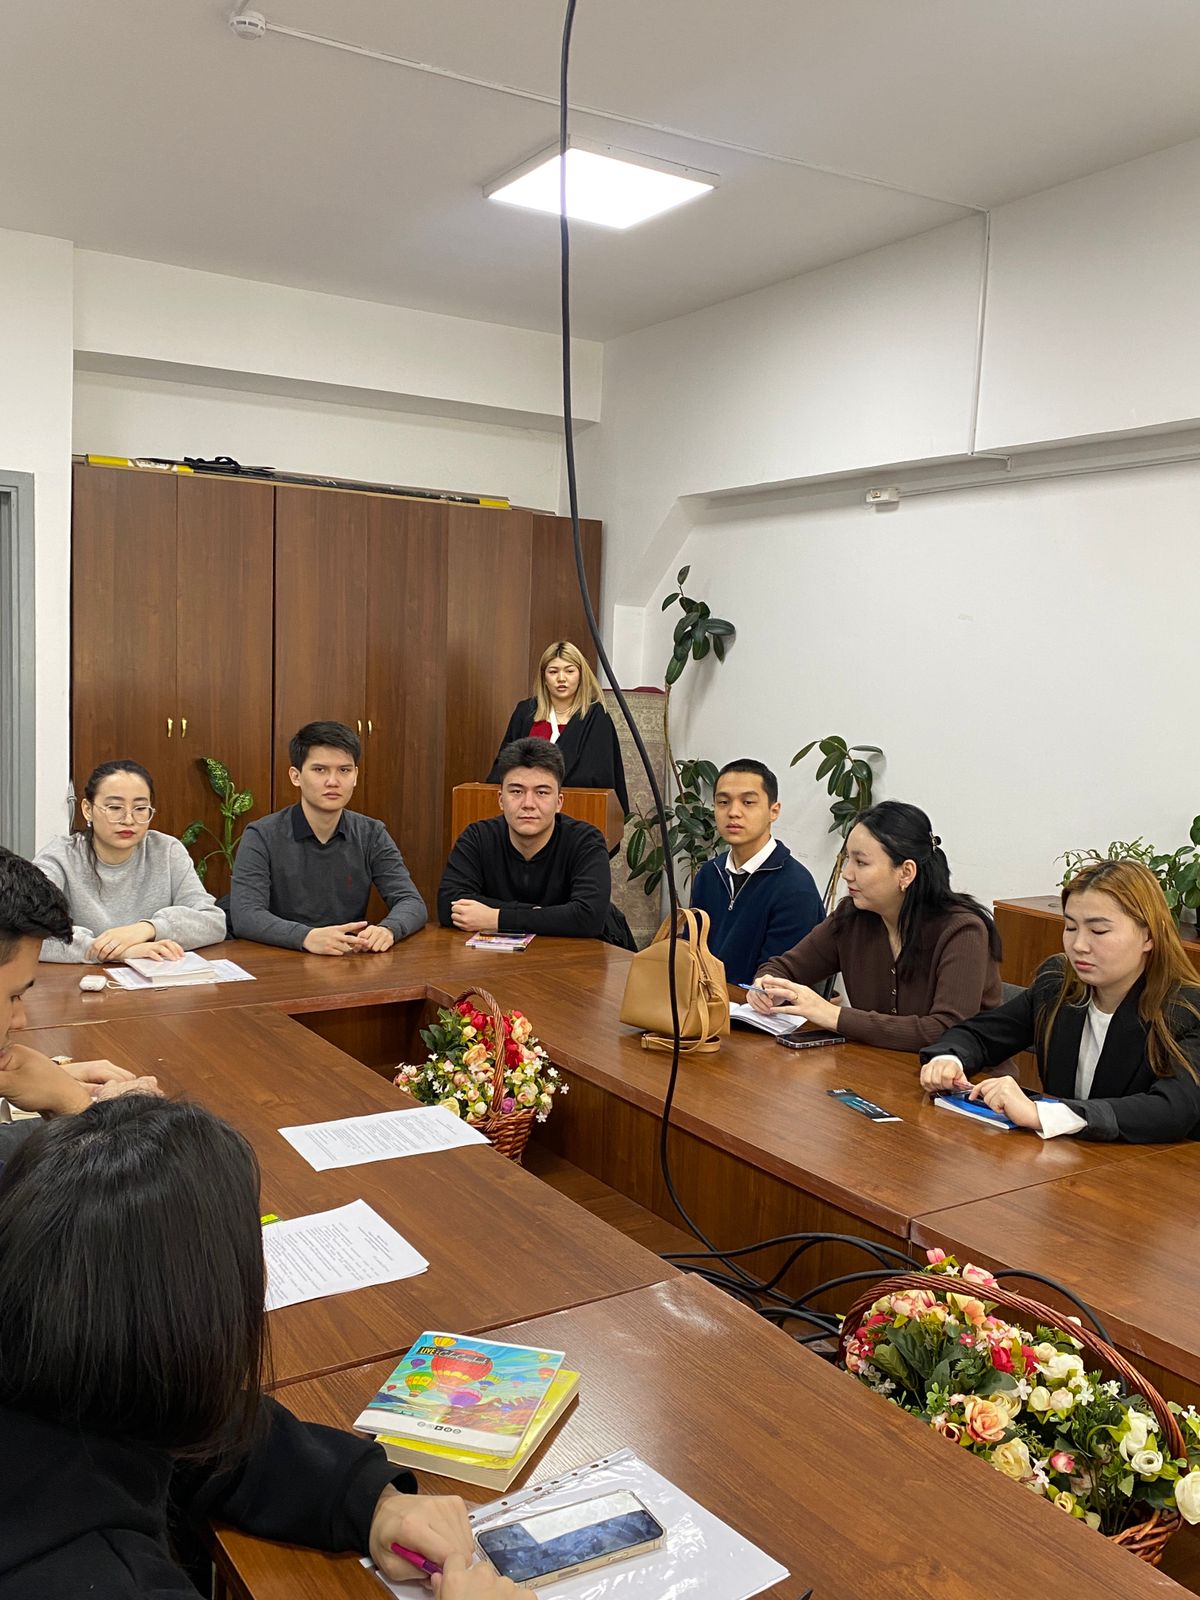 On February 08, 2024, at the Department of Civil Law, Civil Procedure and Labor Law, a scientific seminar was held on the topic: "Violence and social order" within the framework of the implementation of the UN SDGs